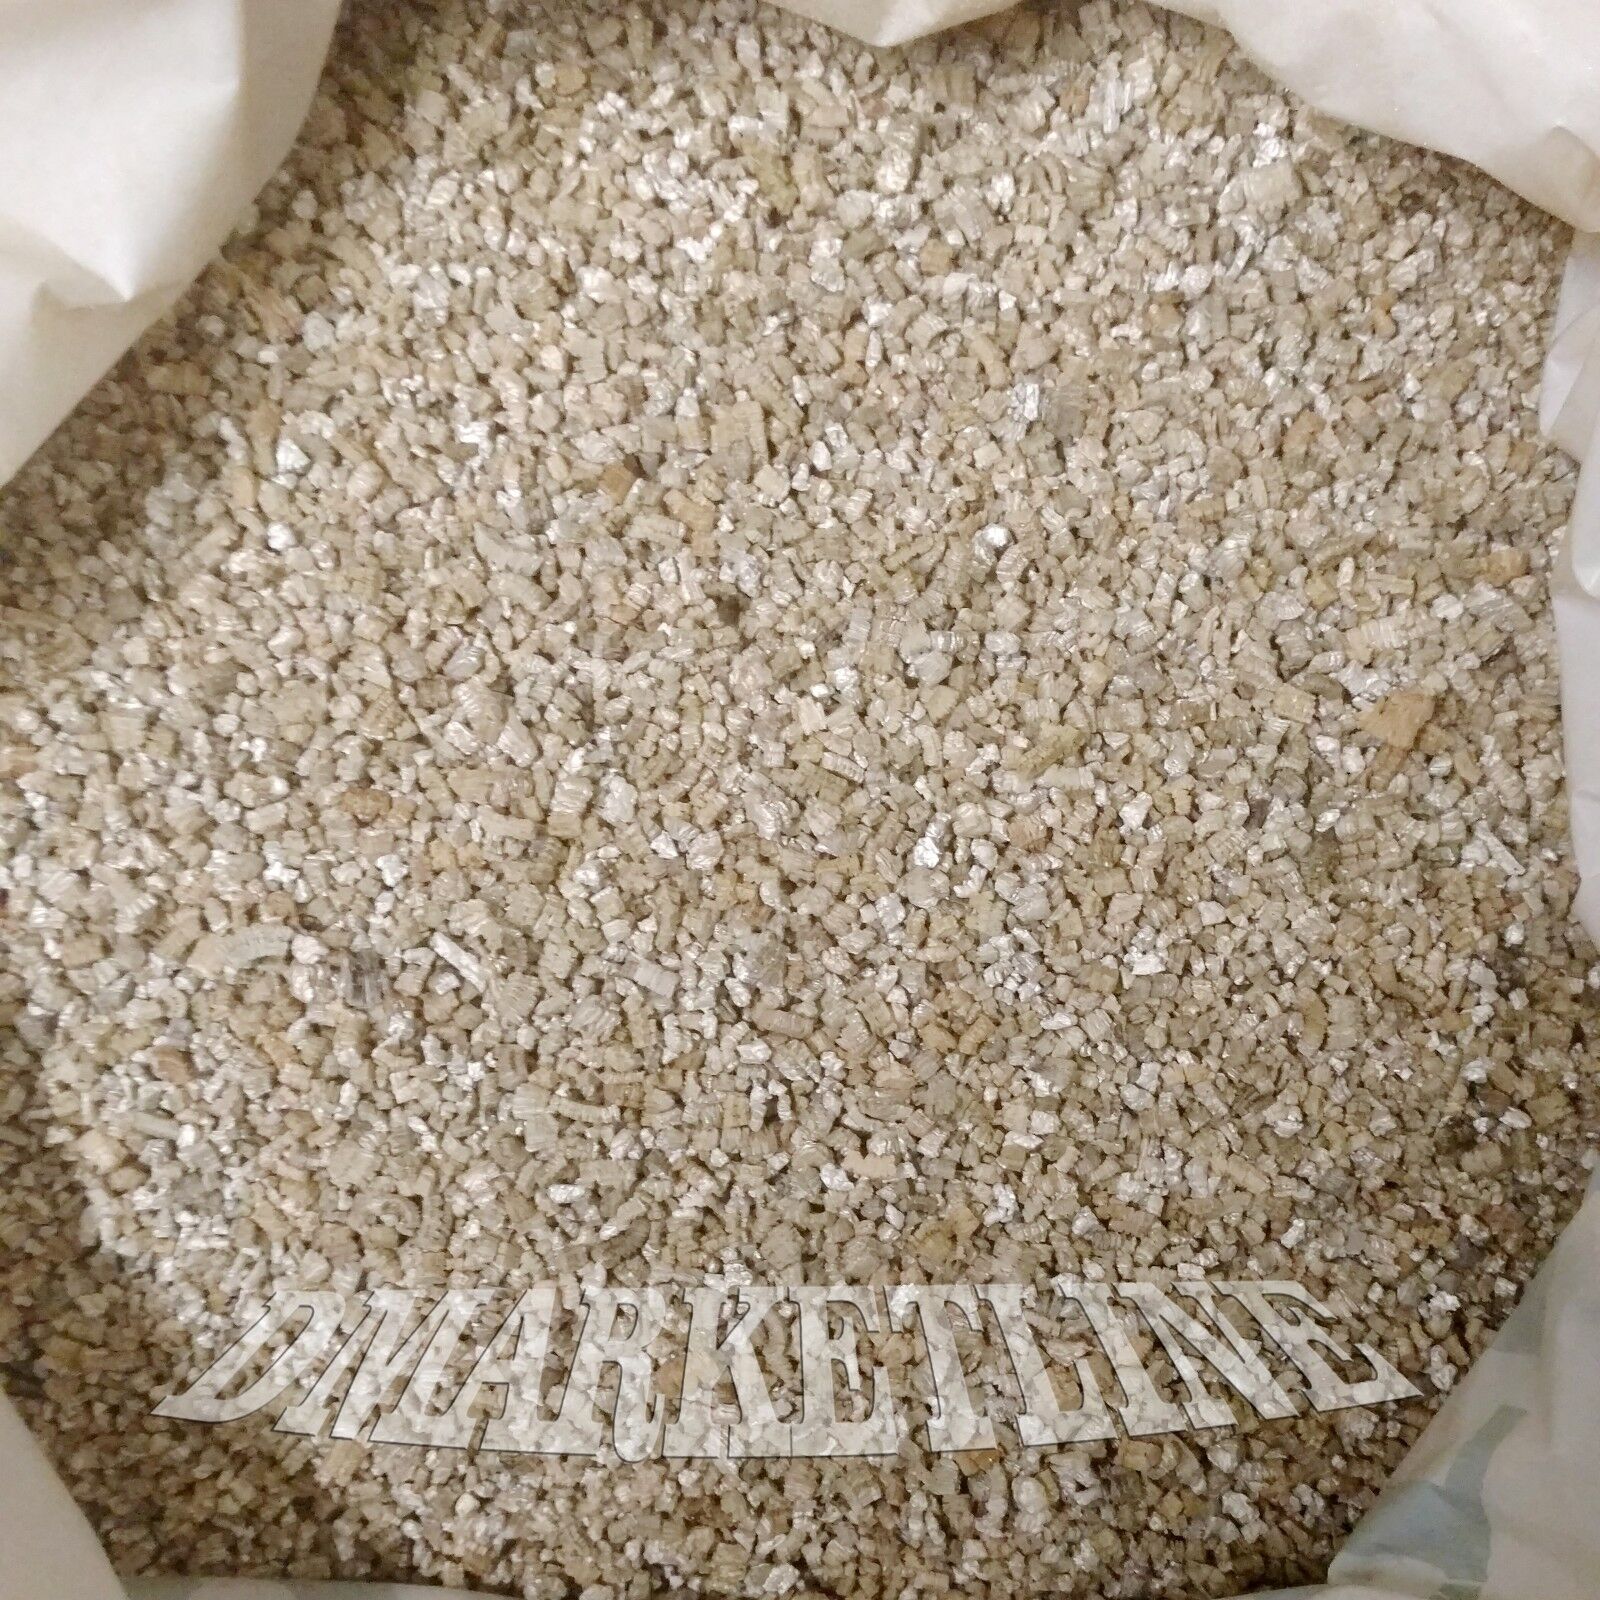 QUALITY VERMICULITE (MEDIUM) FOR SEED STARTING POTTING GARDEN REPTILE BEDDING